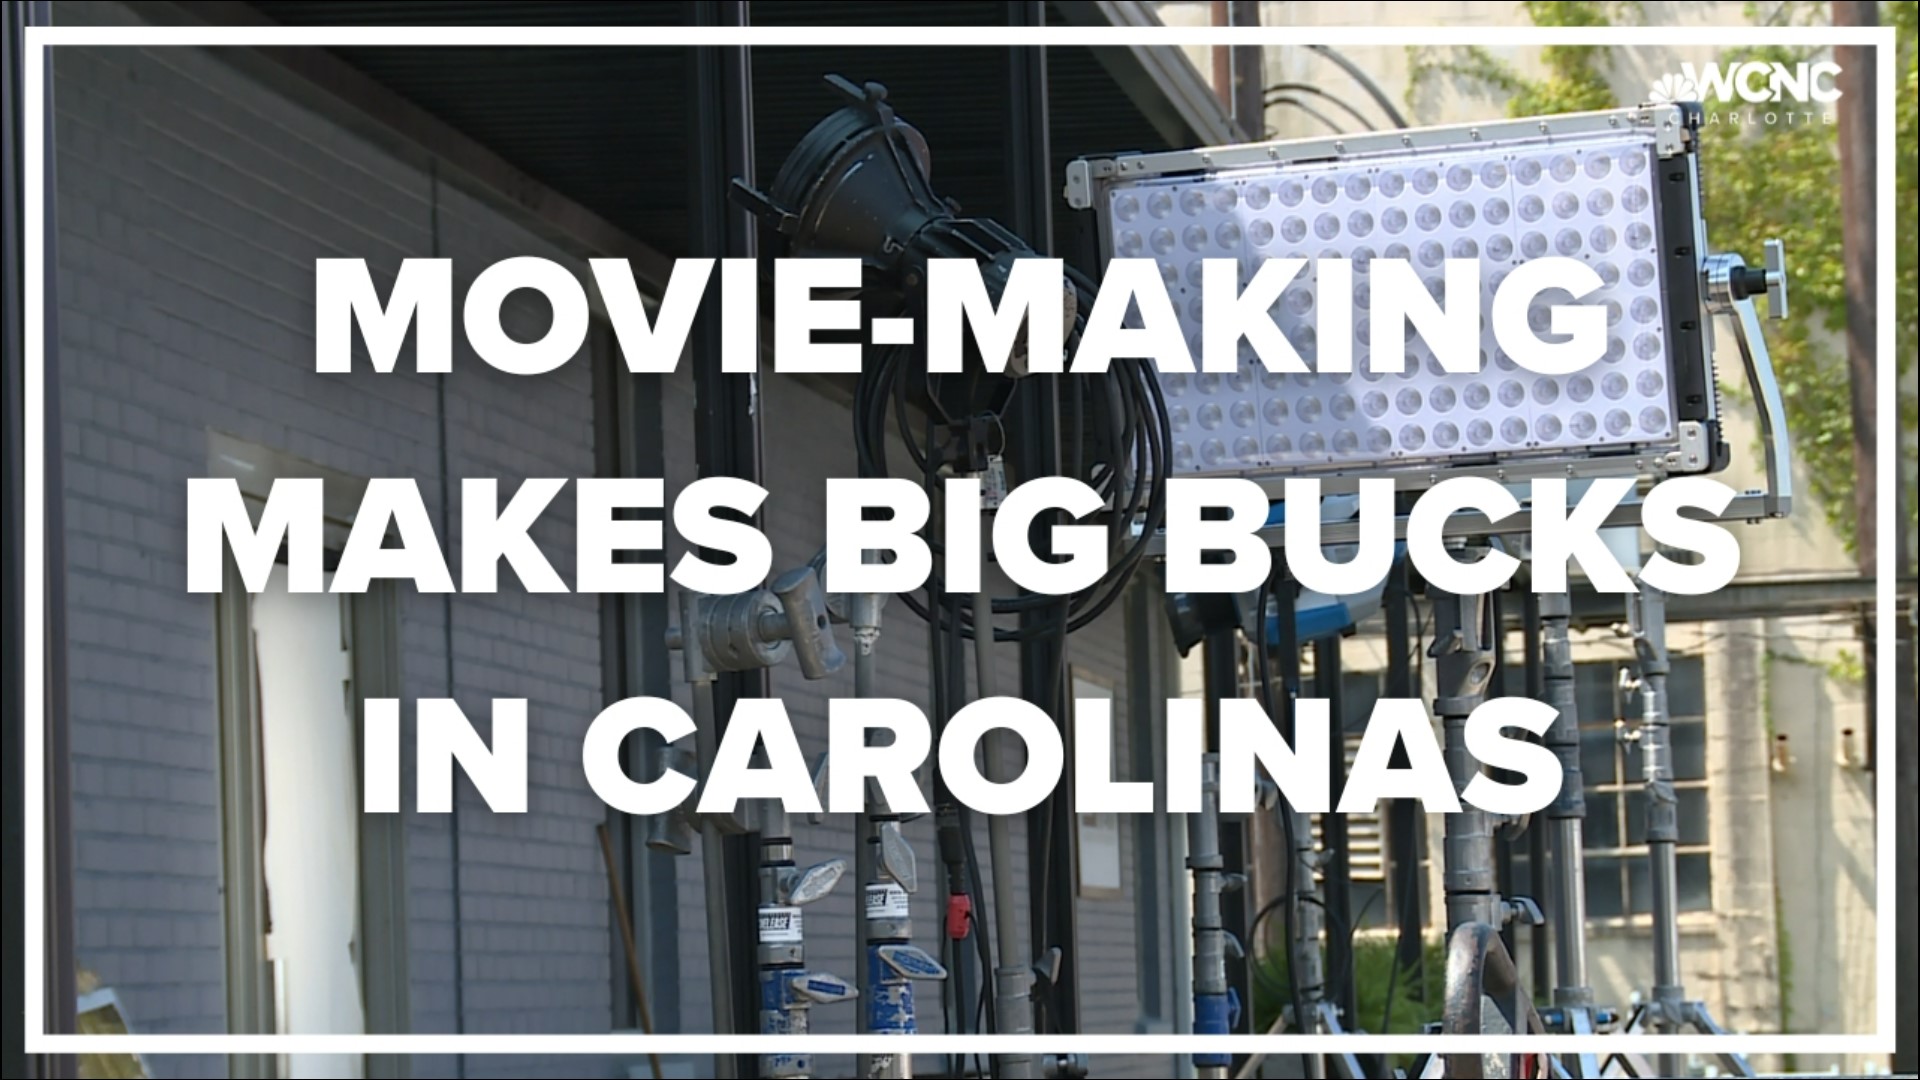 According to the North Carolina Film Office, production projects created 11,000 jobs and invested $180 million into the state in the first half of 2022.